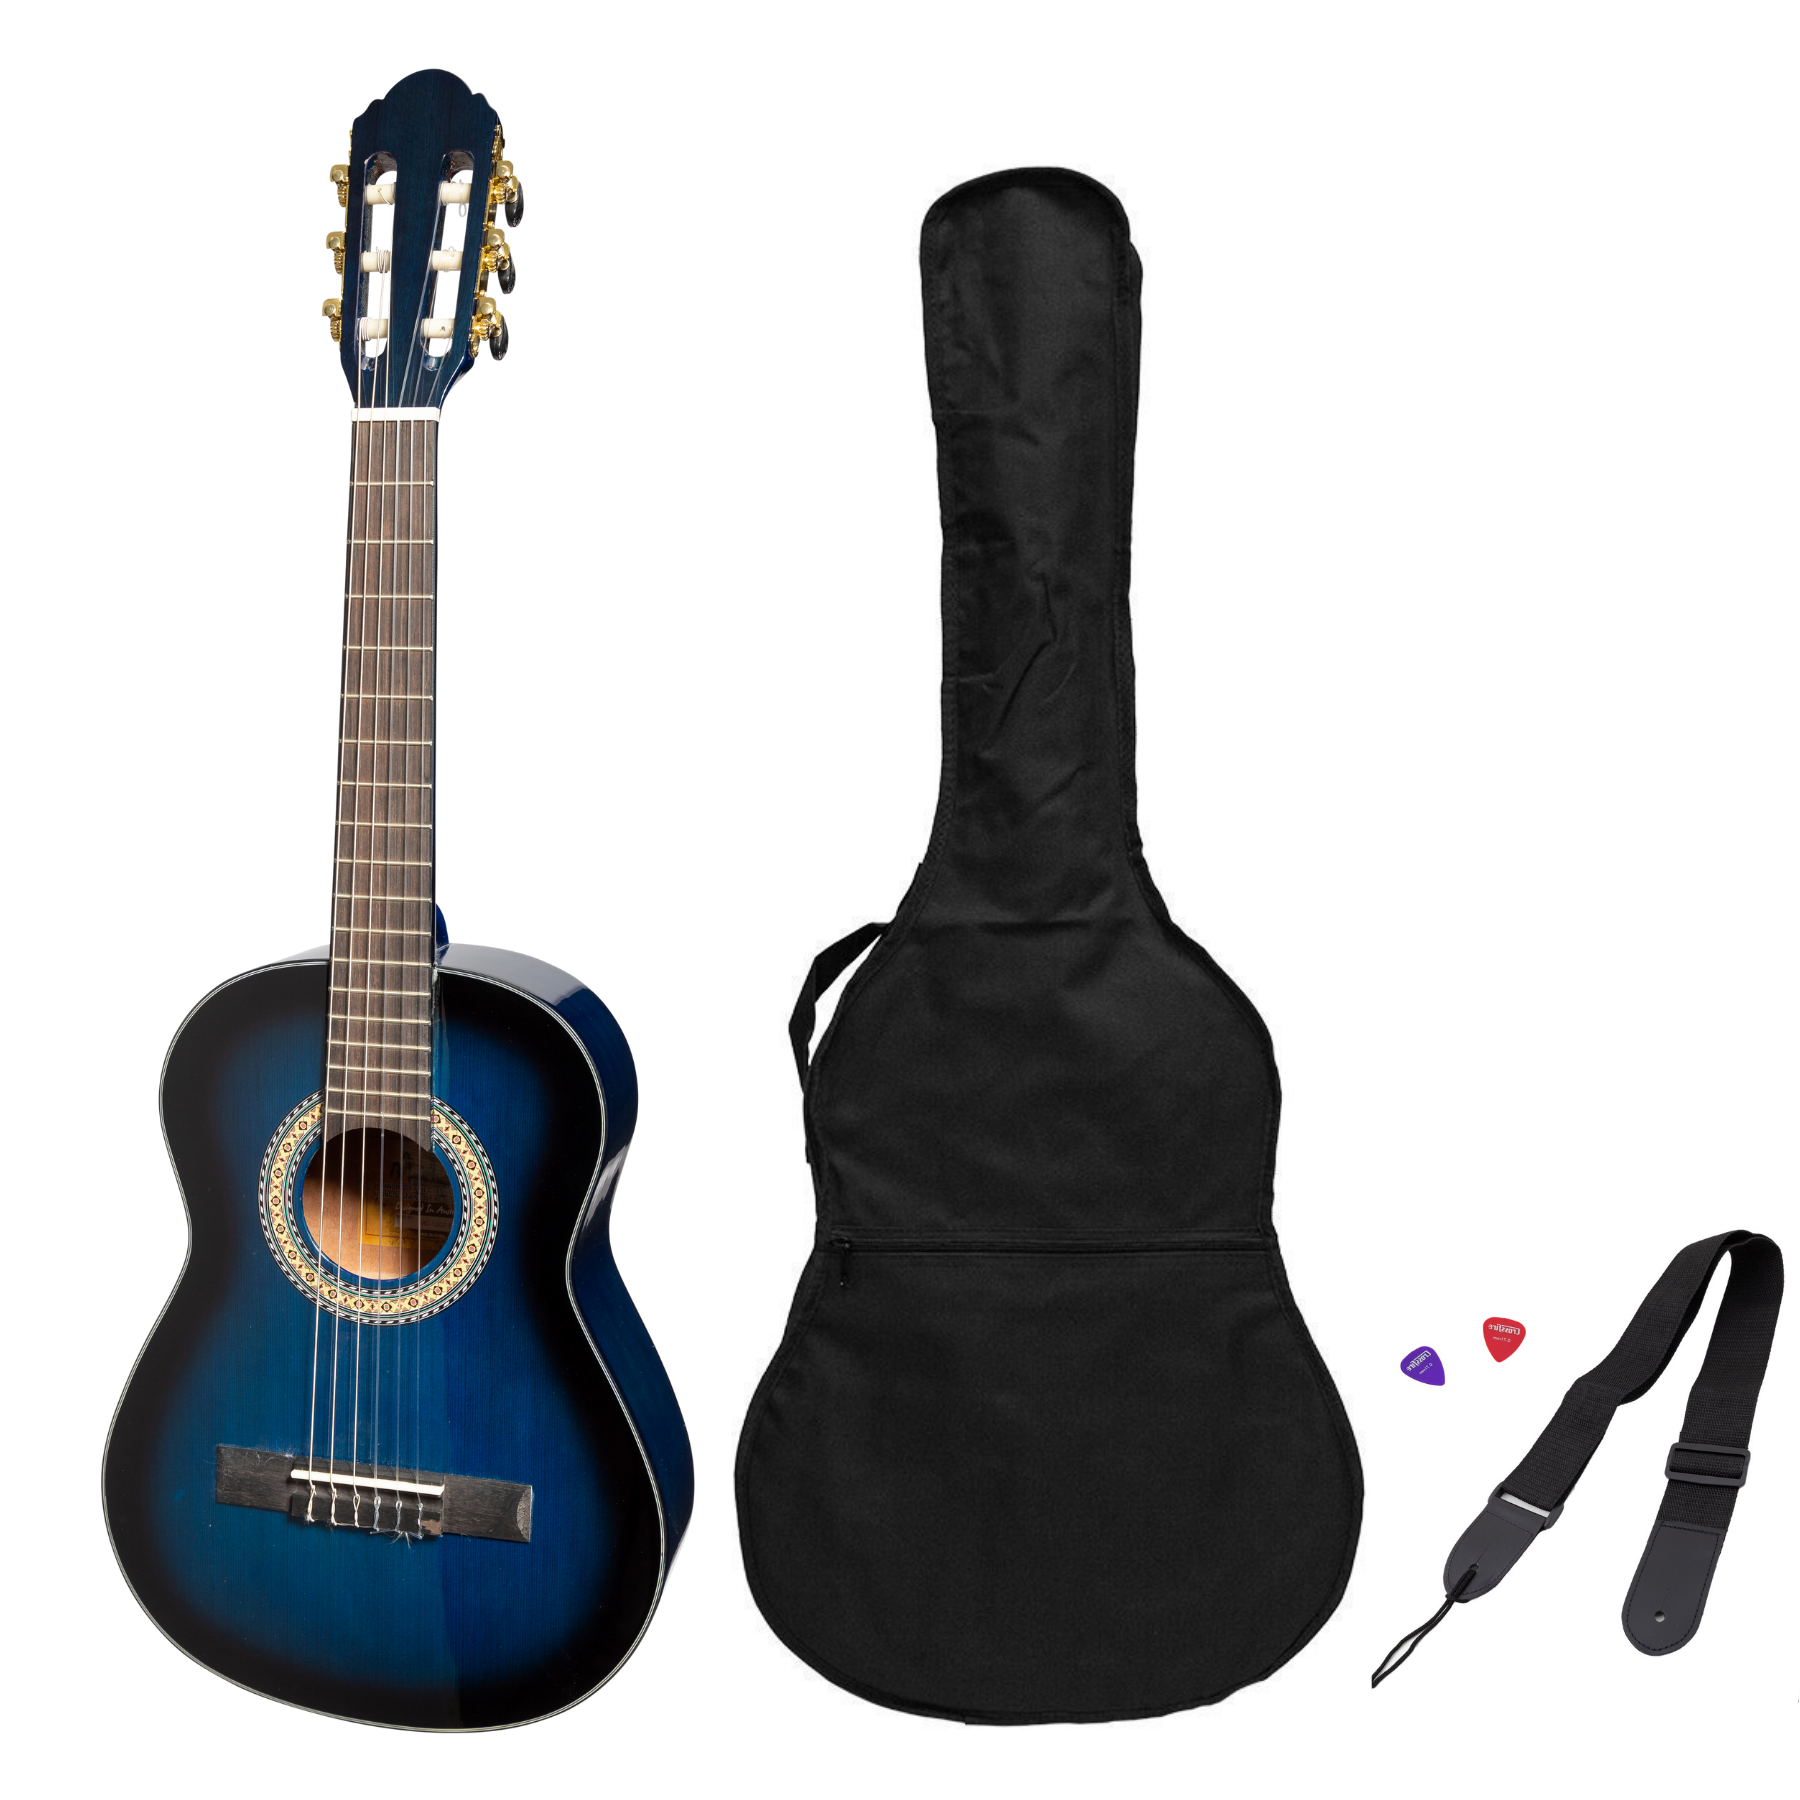 Martinez G-Series 1/2 Size Student Classical Guitar Pack with Built In Tuner (Blue-Gloss)-MP-12GT-BLS